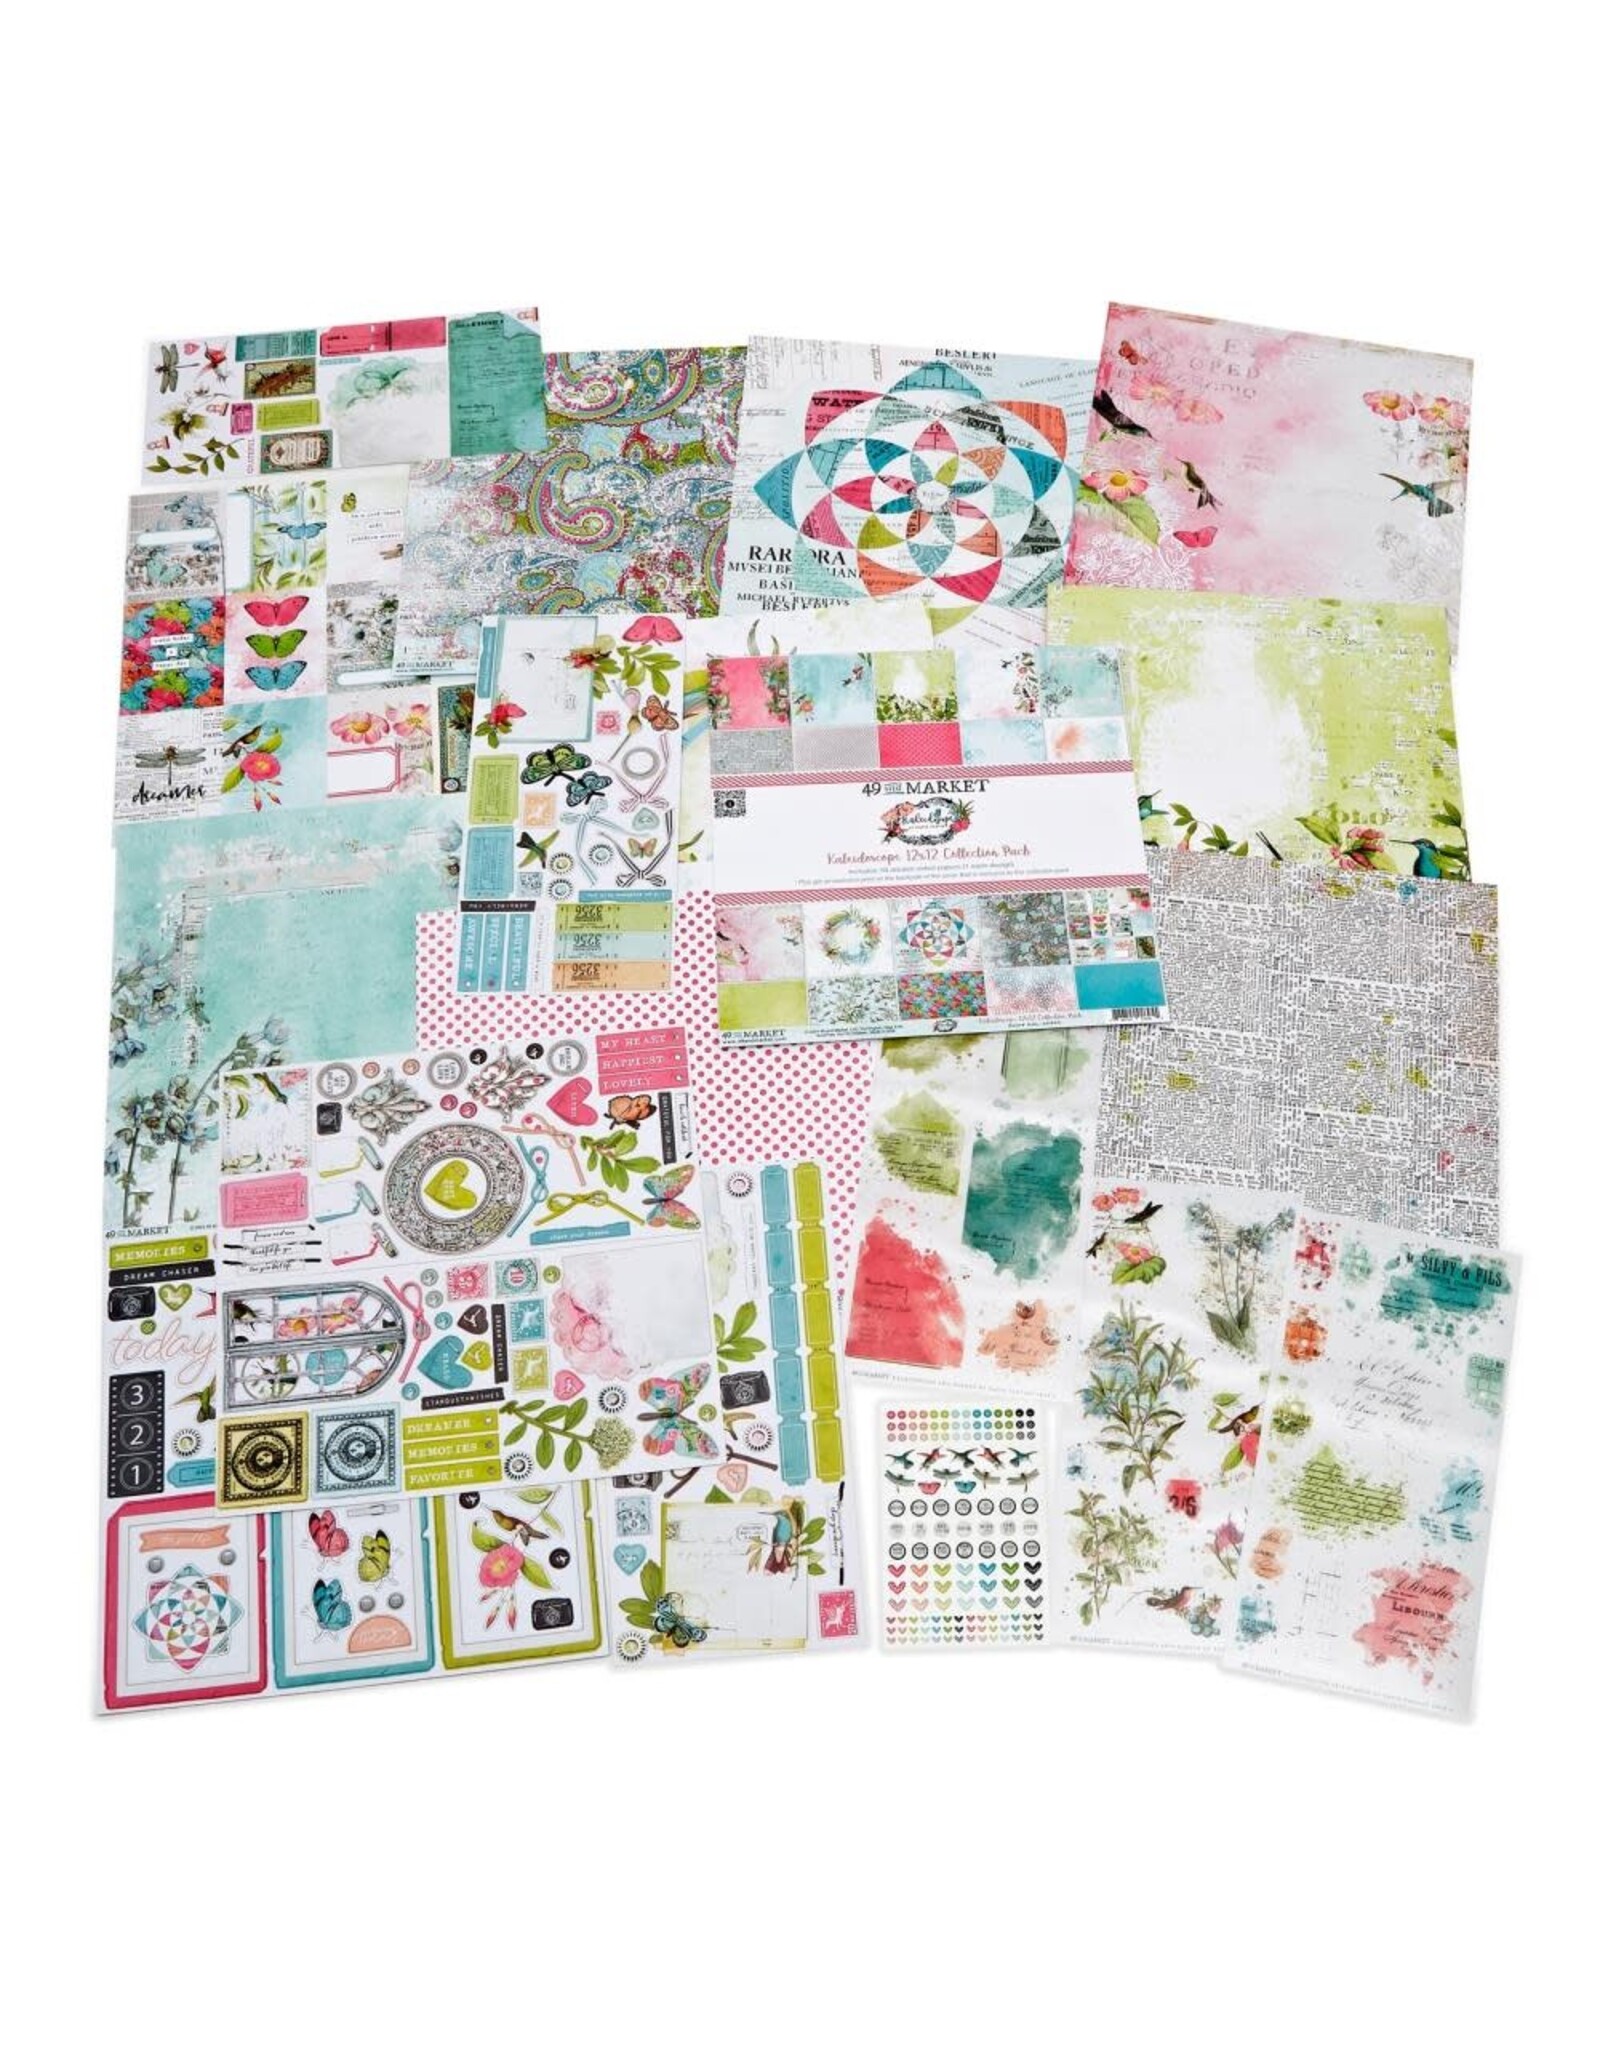 49 AND MARKET 49 AND MARKET KALEIDOSCOPE COLLECTION BUNDLE WITH CUSTOM CHIPBOARD